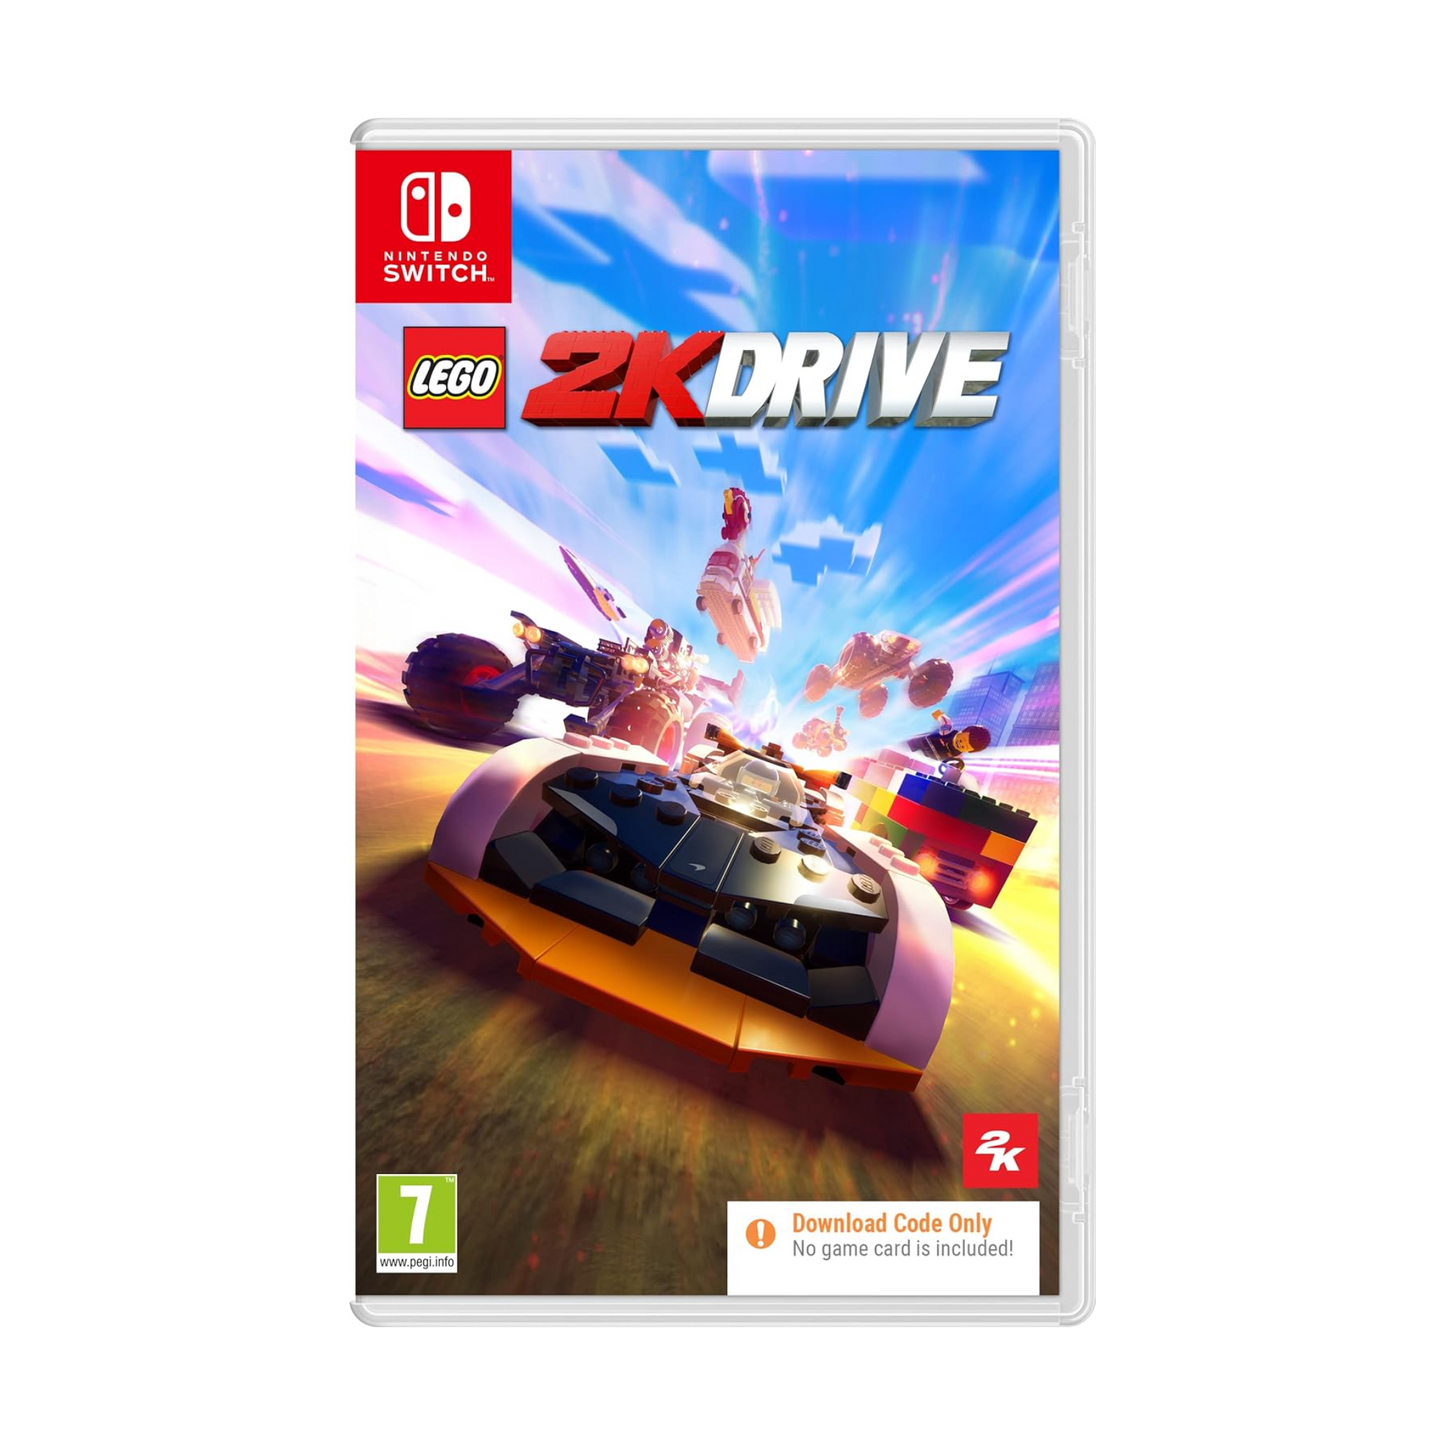 Lego 2K drive Video Game for Nintendo Switch